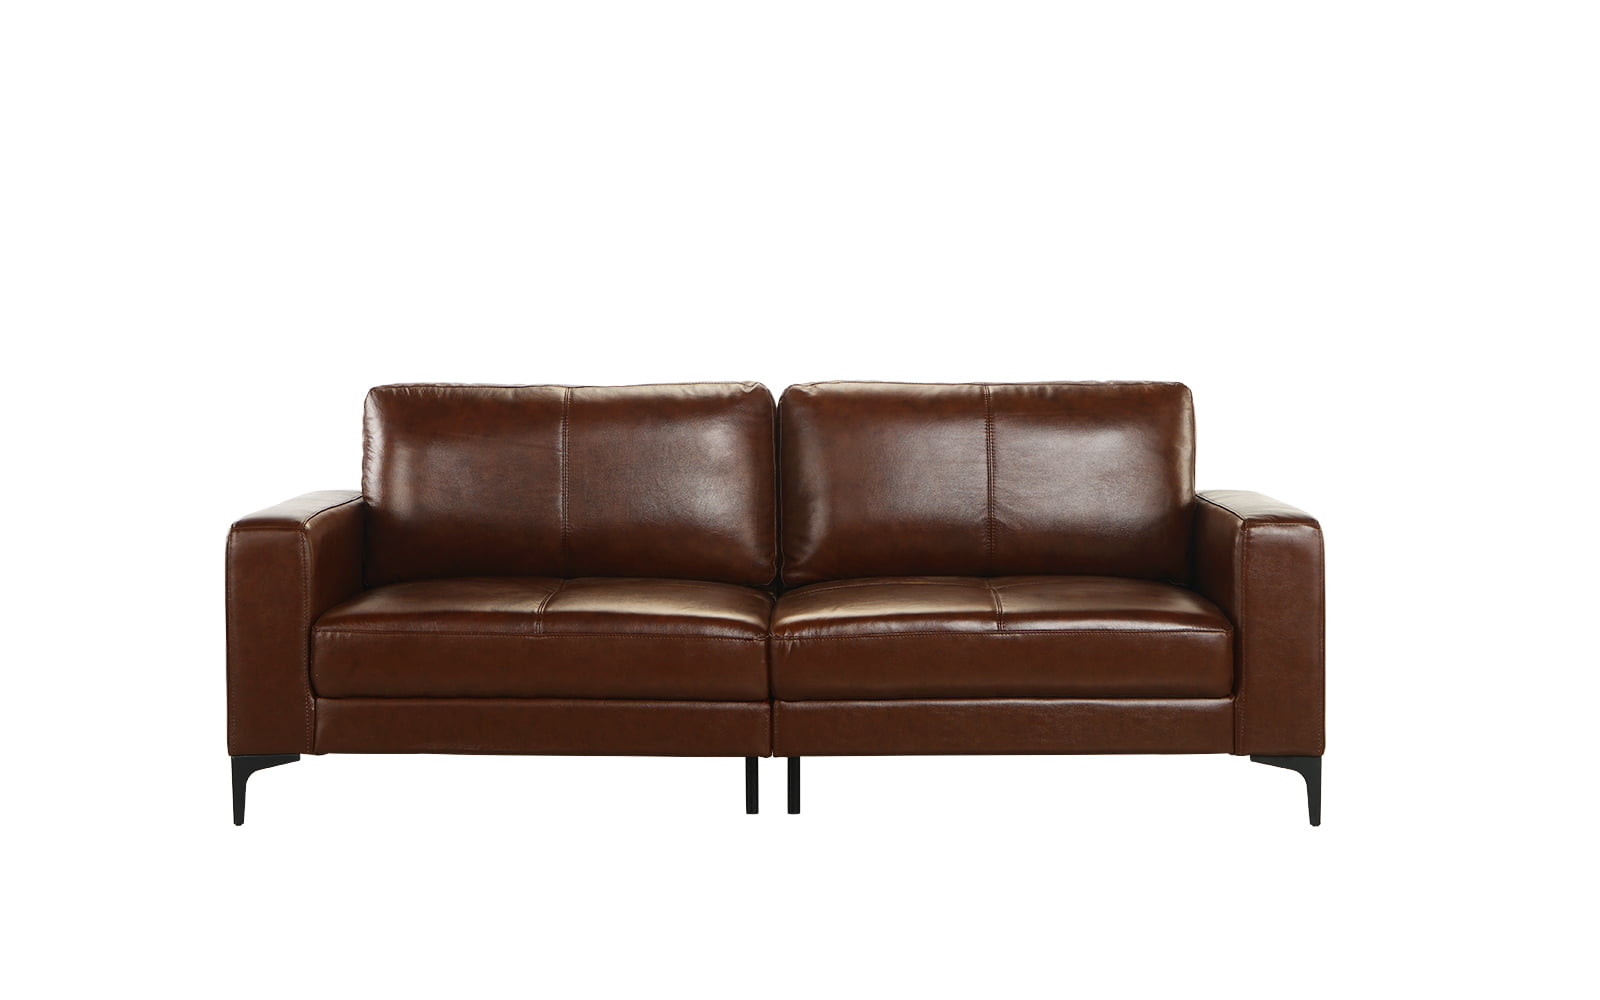 mid century modern with black leather sofa